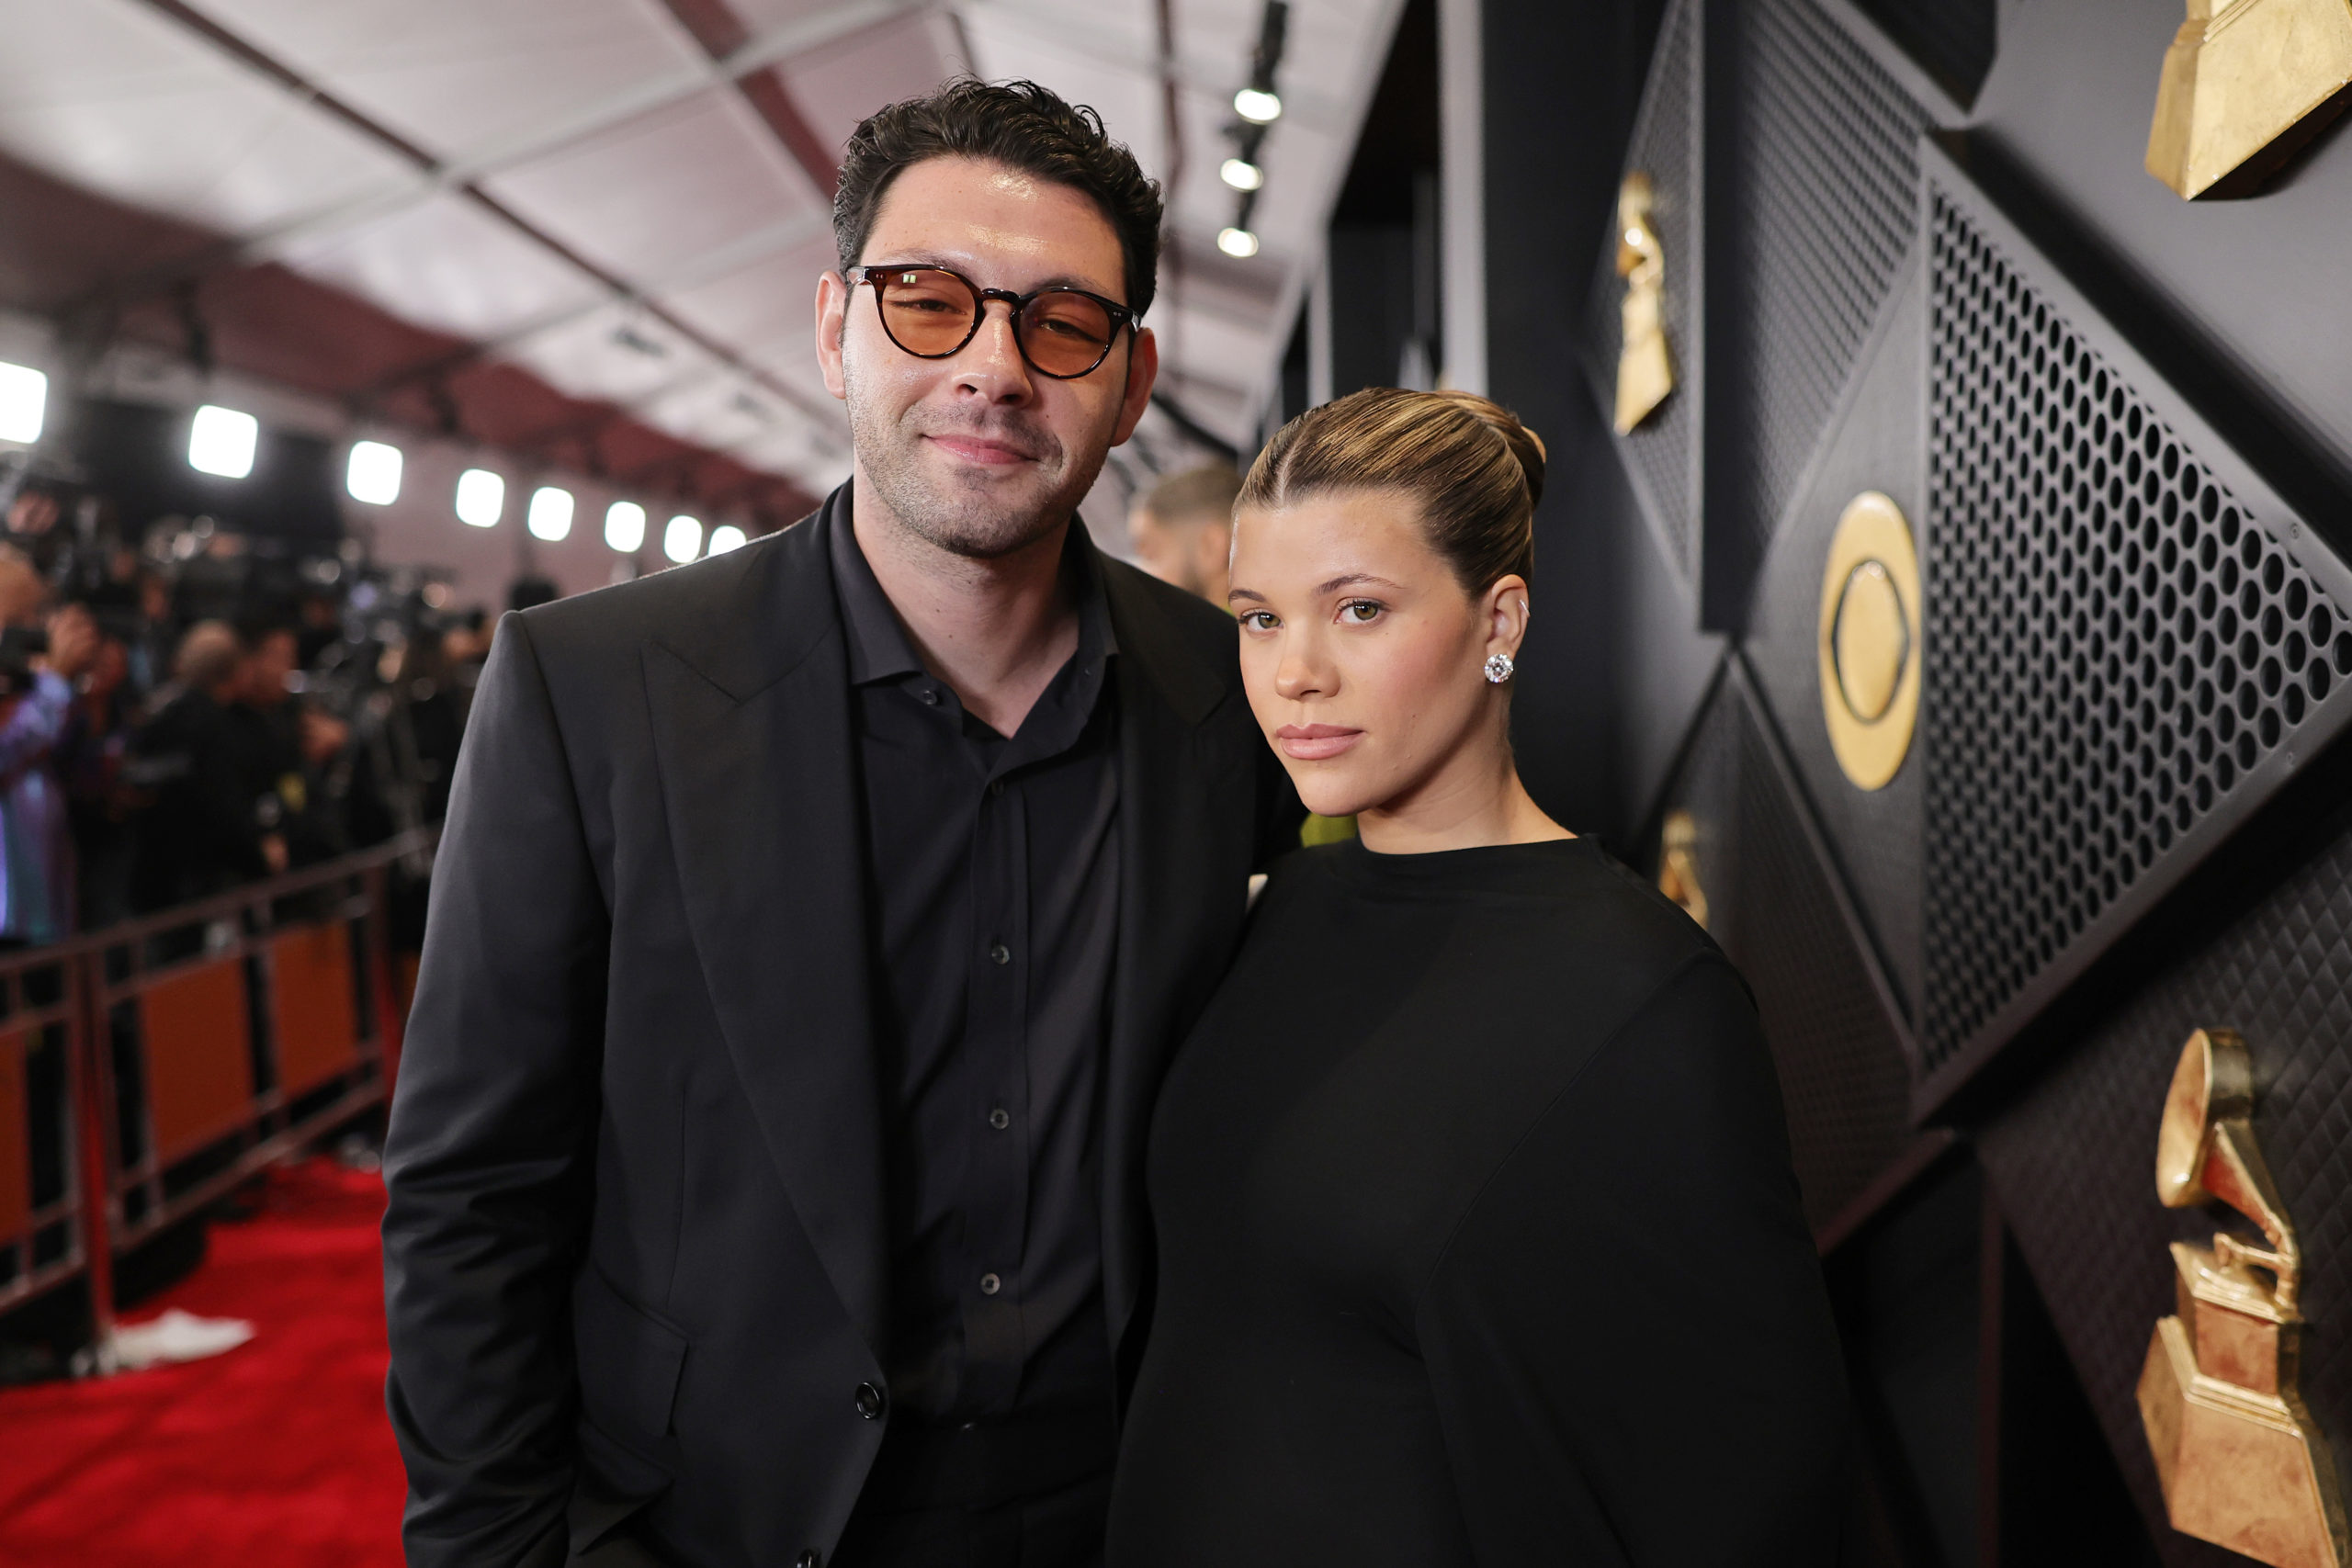 LOS ANGELES, CALIFORNIA - FEBRUARY 04: (L-R) Elliot Grainge and Sofia Richie Grainge attend the 66th GRAMMY Awards at Crypto.com Arena on February 04, 2024 in Los Angeles, California. (Photo by Neilson Barnard/Getty Images for The Recording Academy)